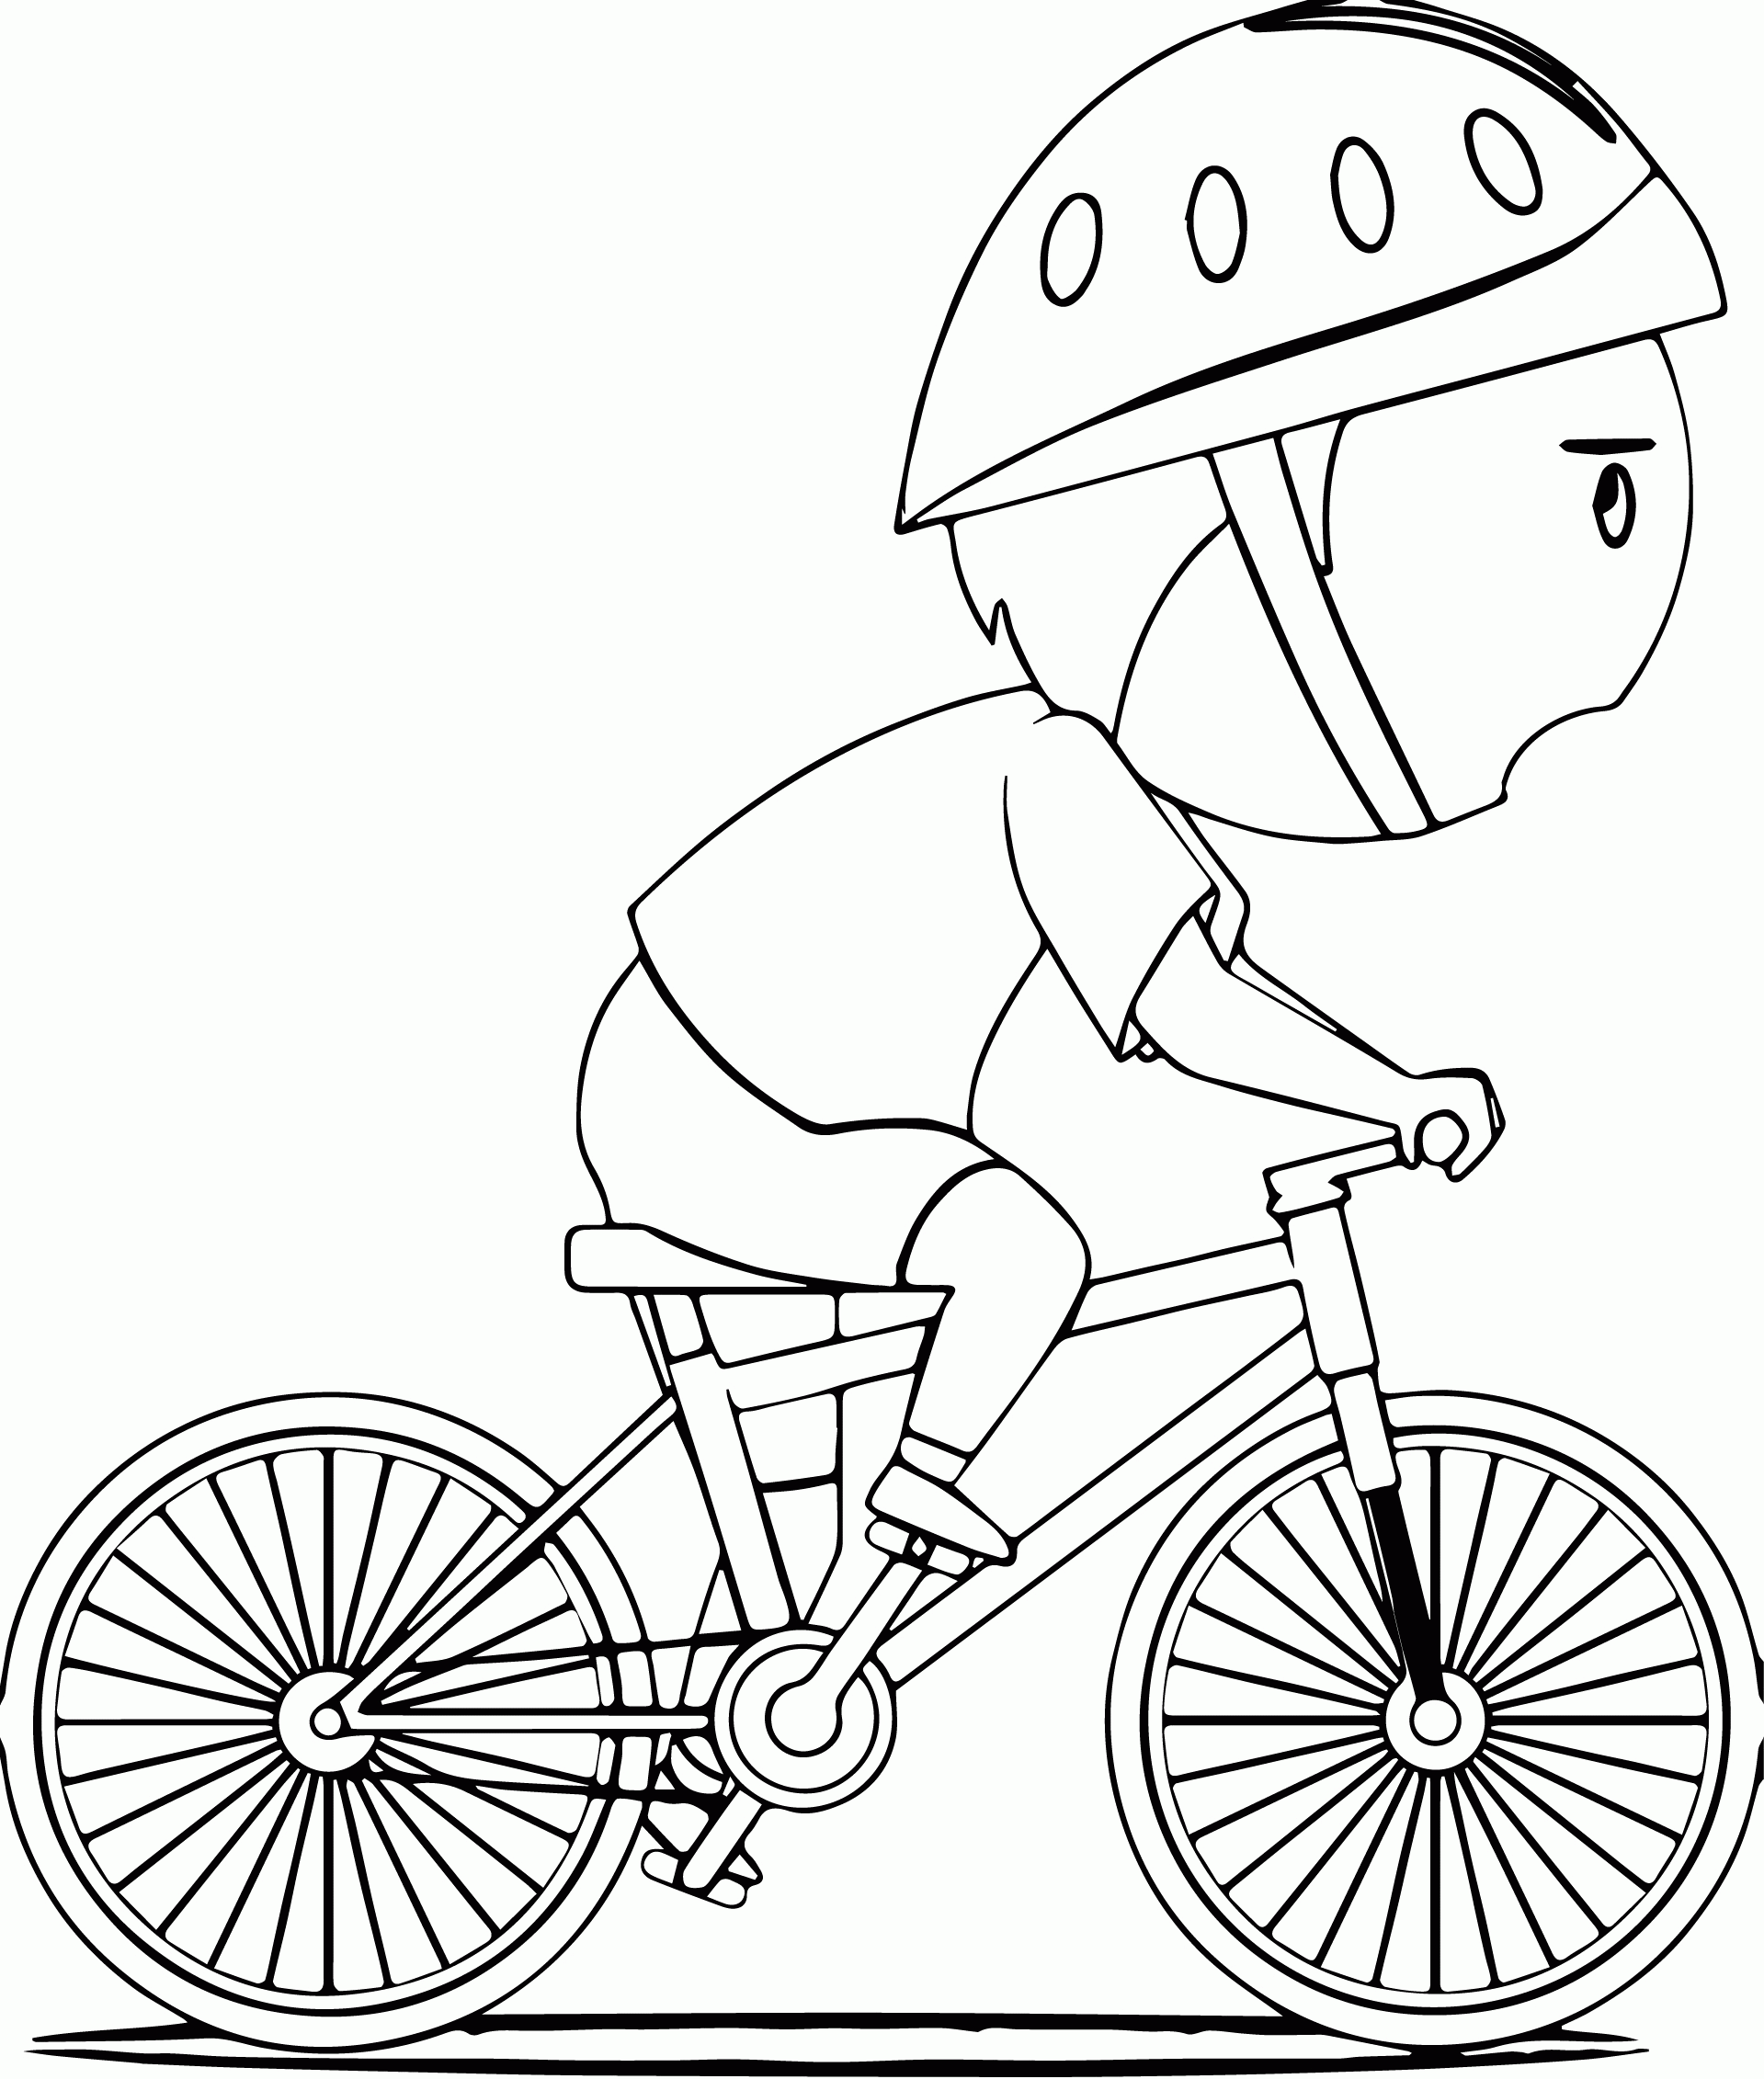 Biycle Coloring Pages | Wecoloringpage